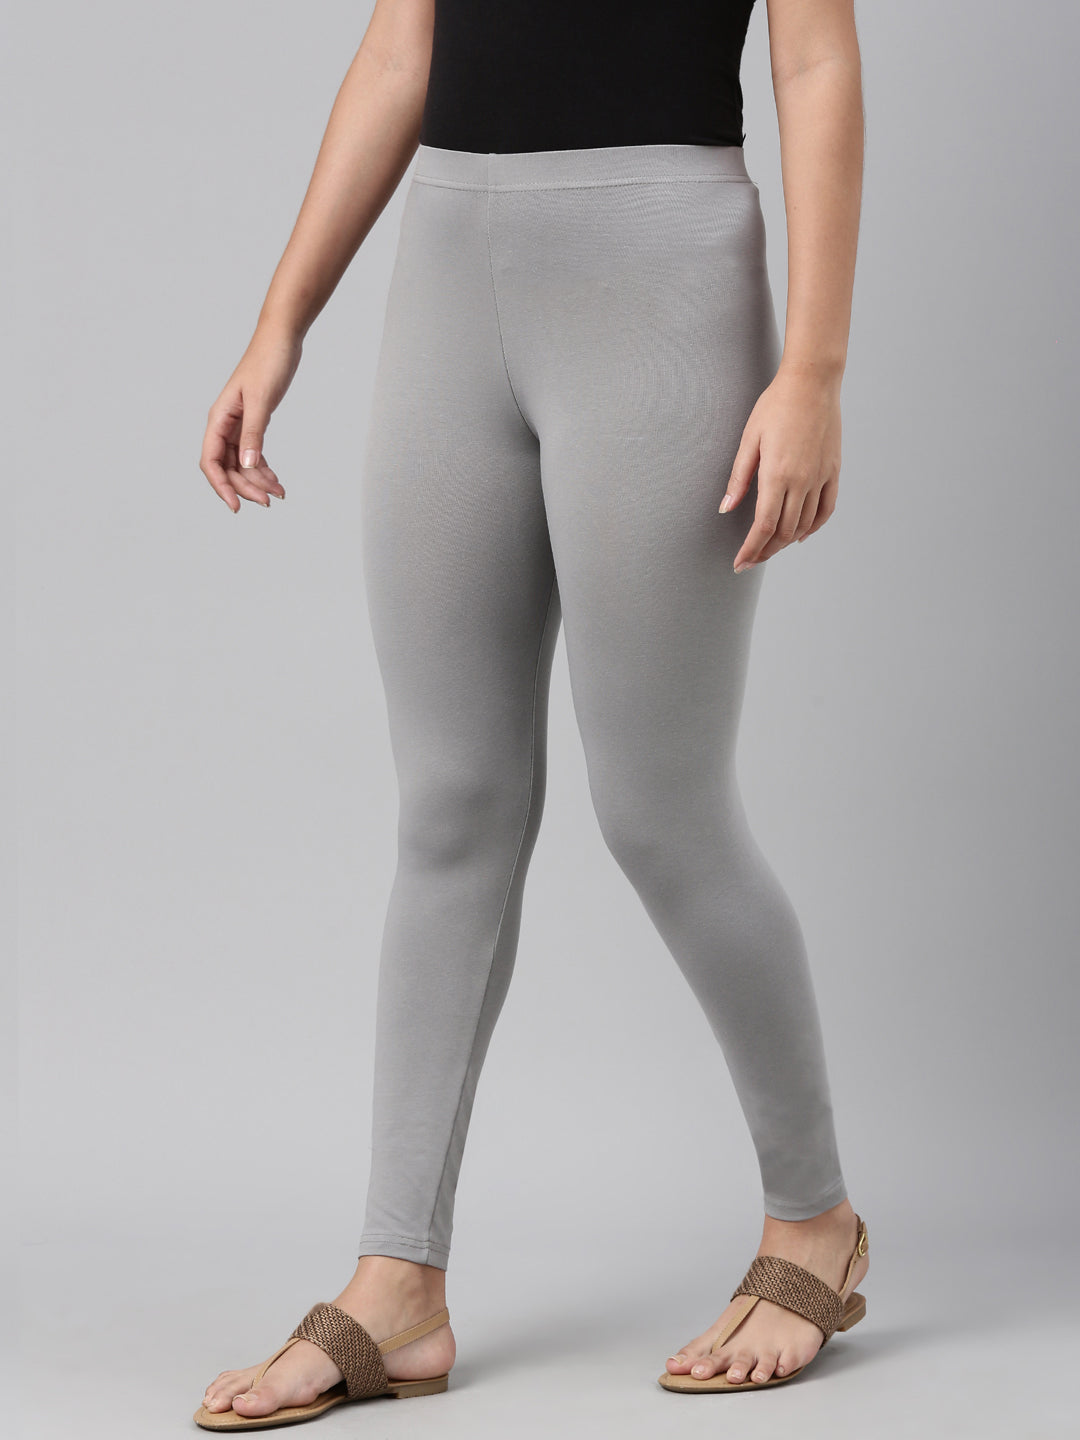 Gray Color Legging Ankle Length – LGM Fashions